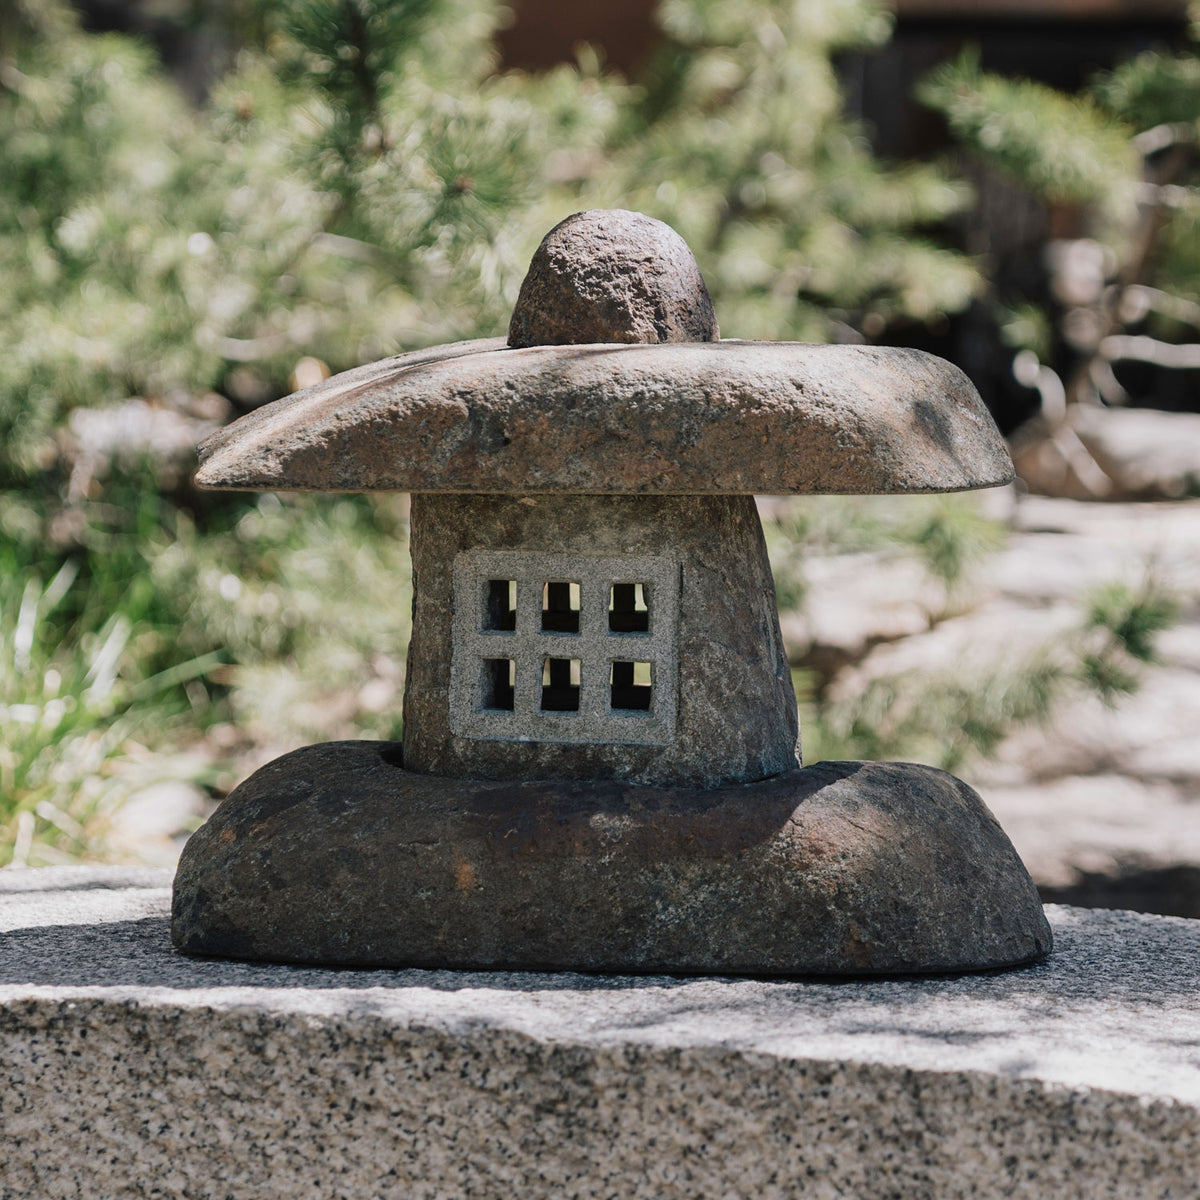 Small Wabi Lantern carved from natural stone with stone window image 4 of 4